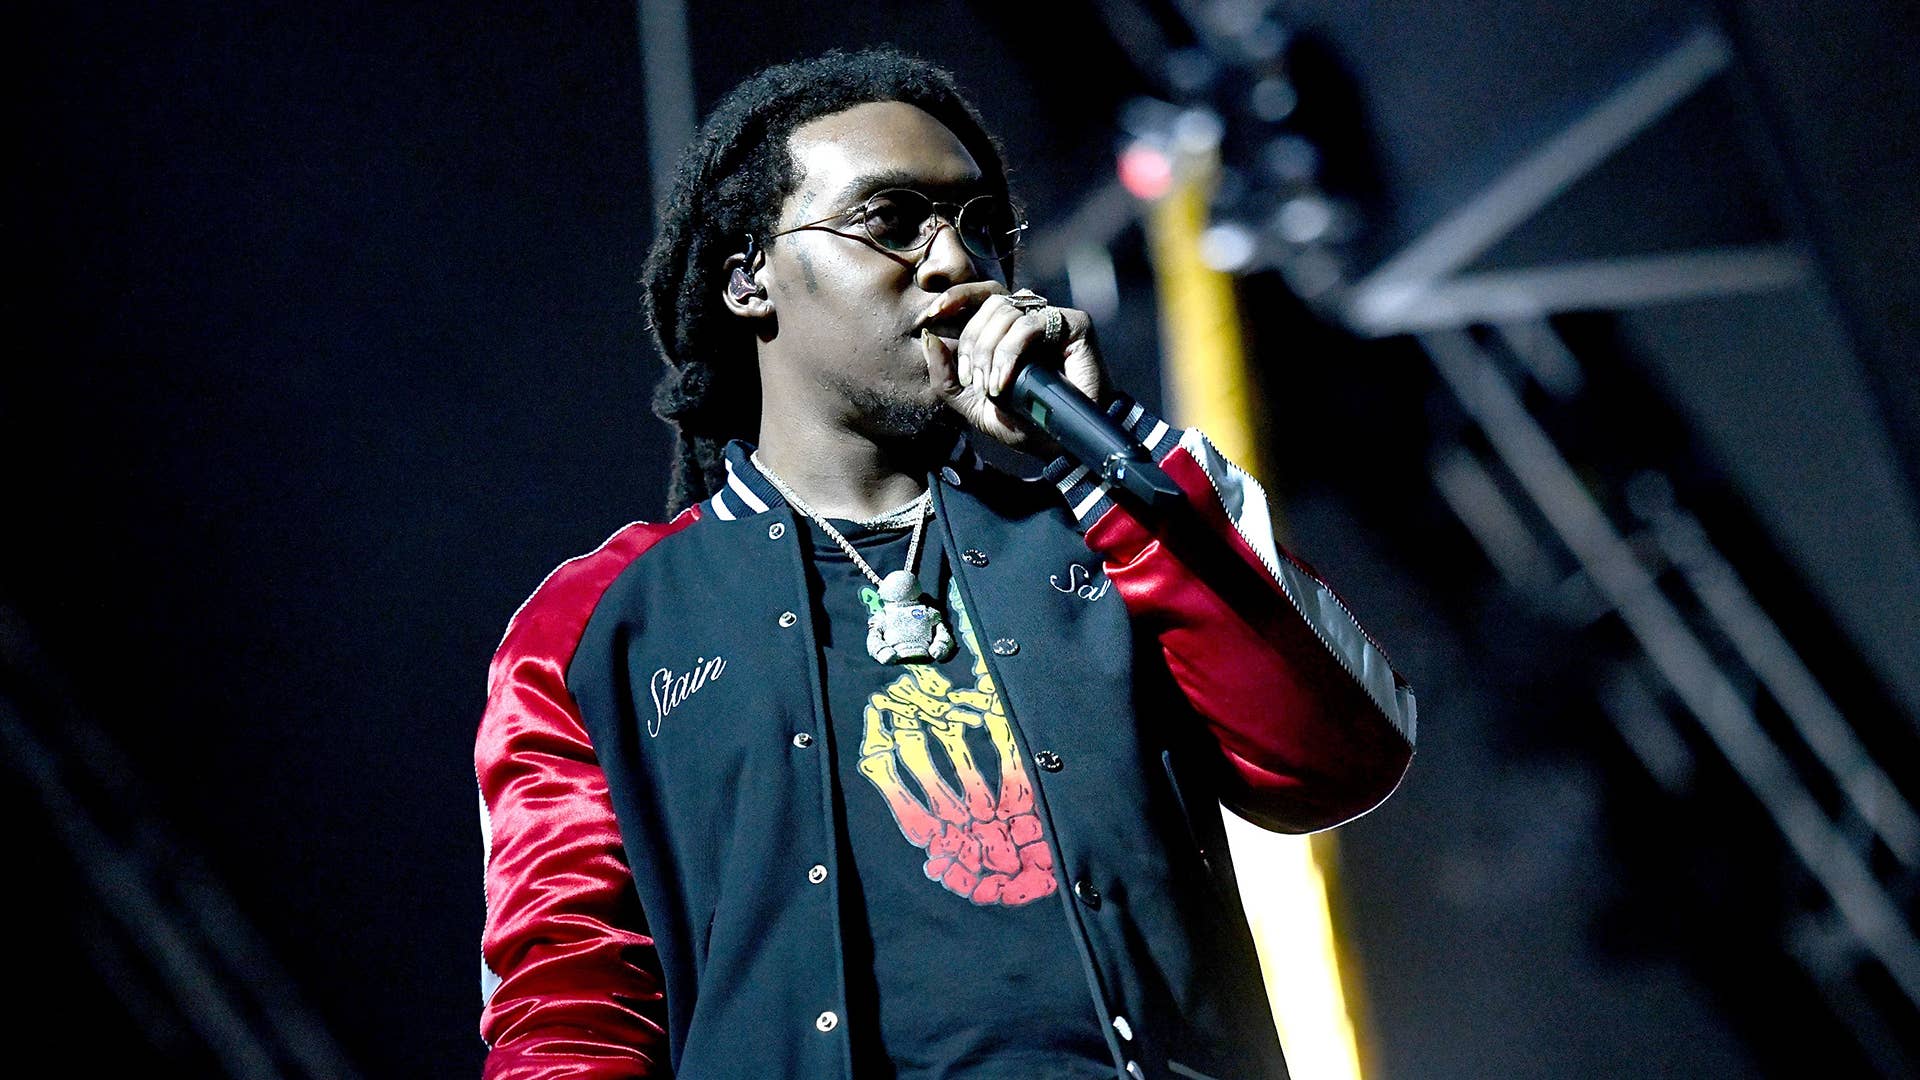 Rapper Takeoff of the hip hip group Migos performs on the Sahara stage during Coachella